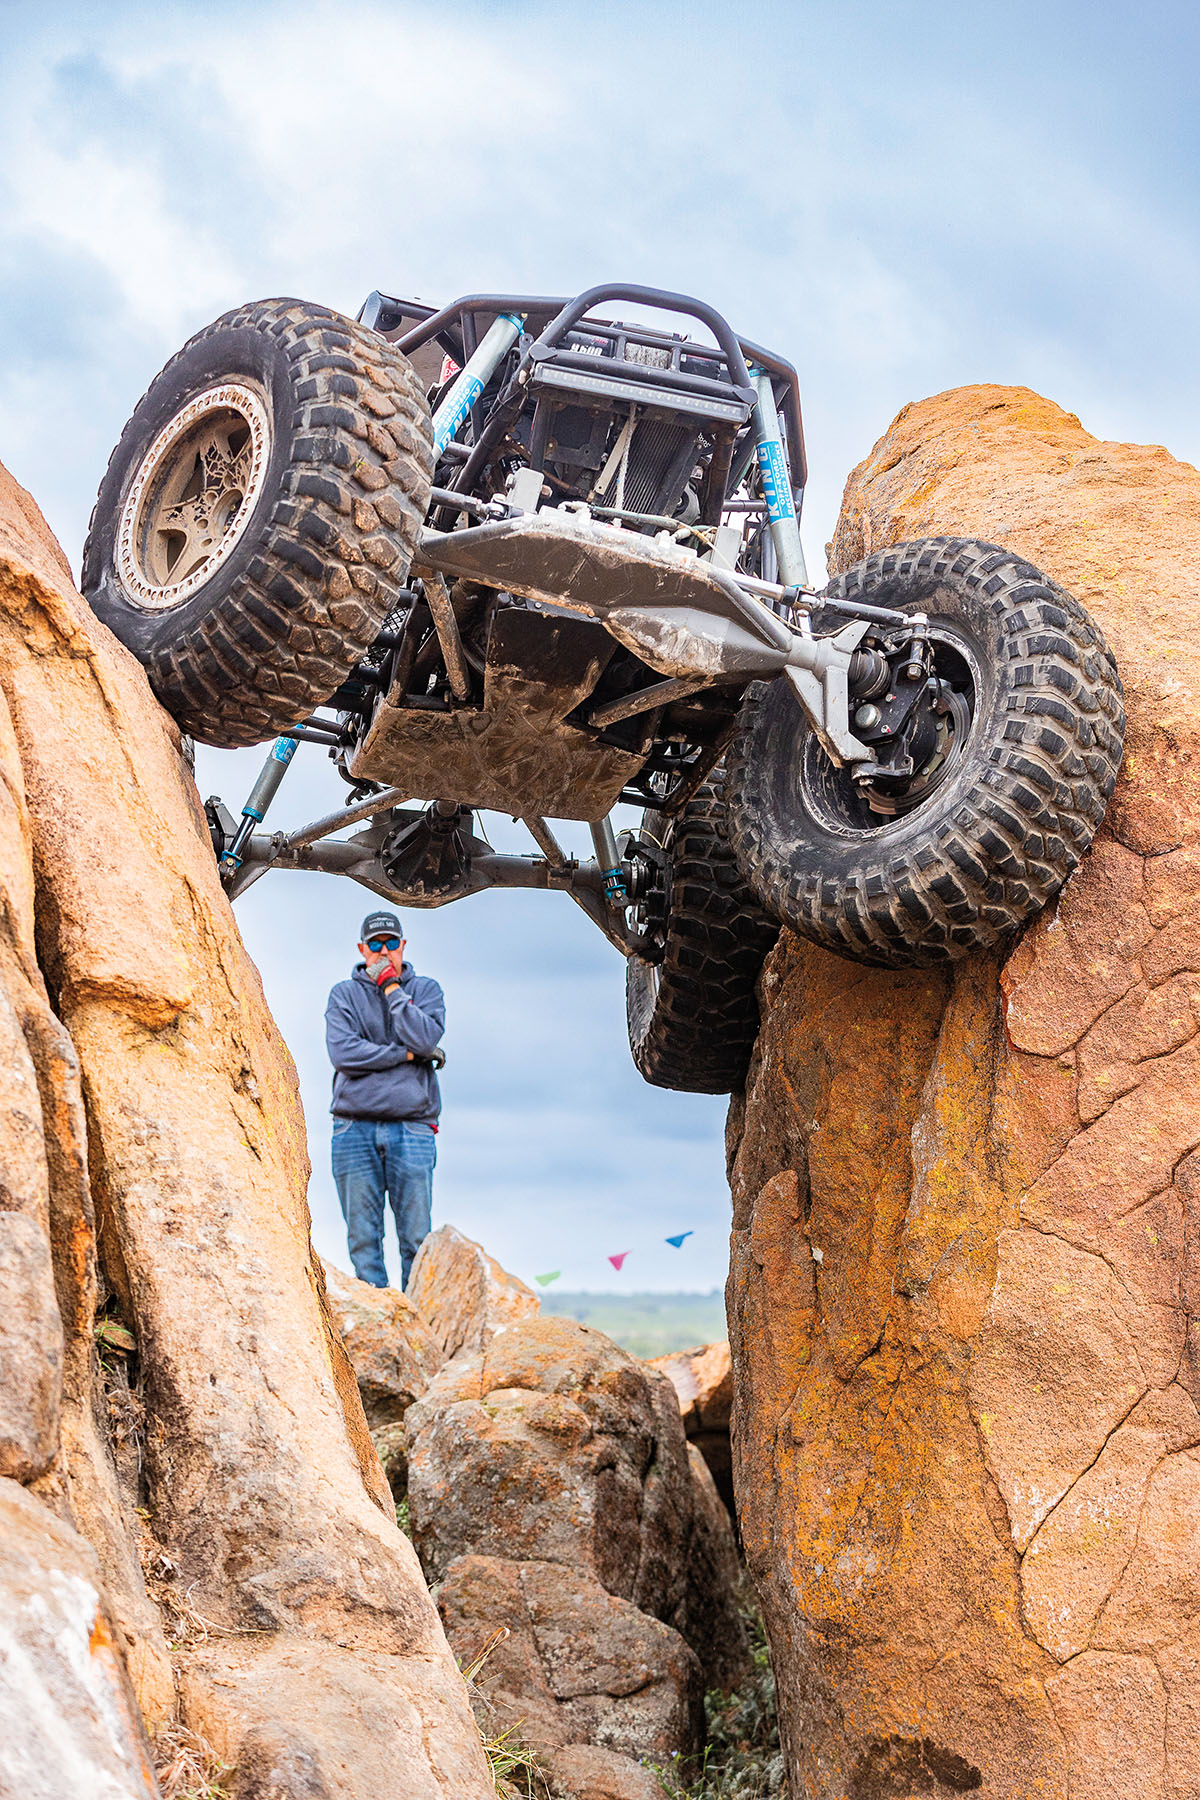 A person stands between two vertical rocks as a large 4x4 vehicle looms overhead